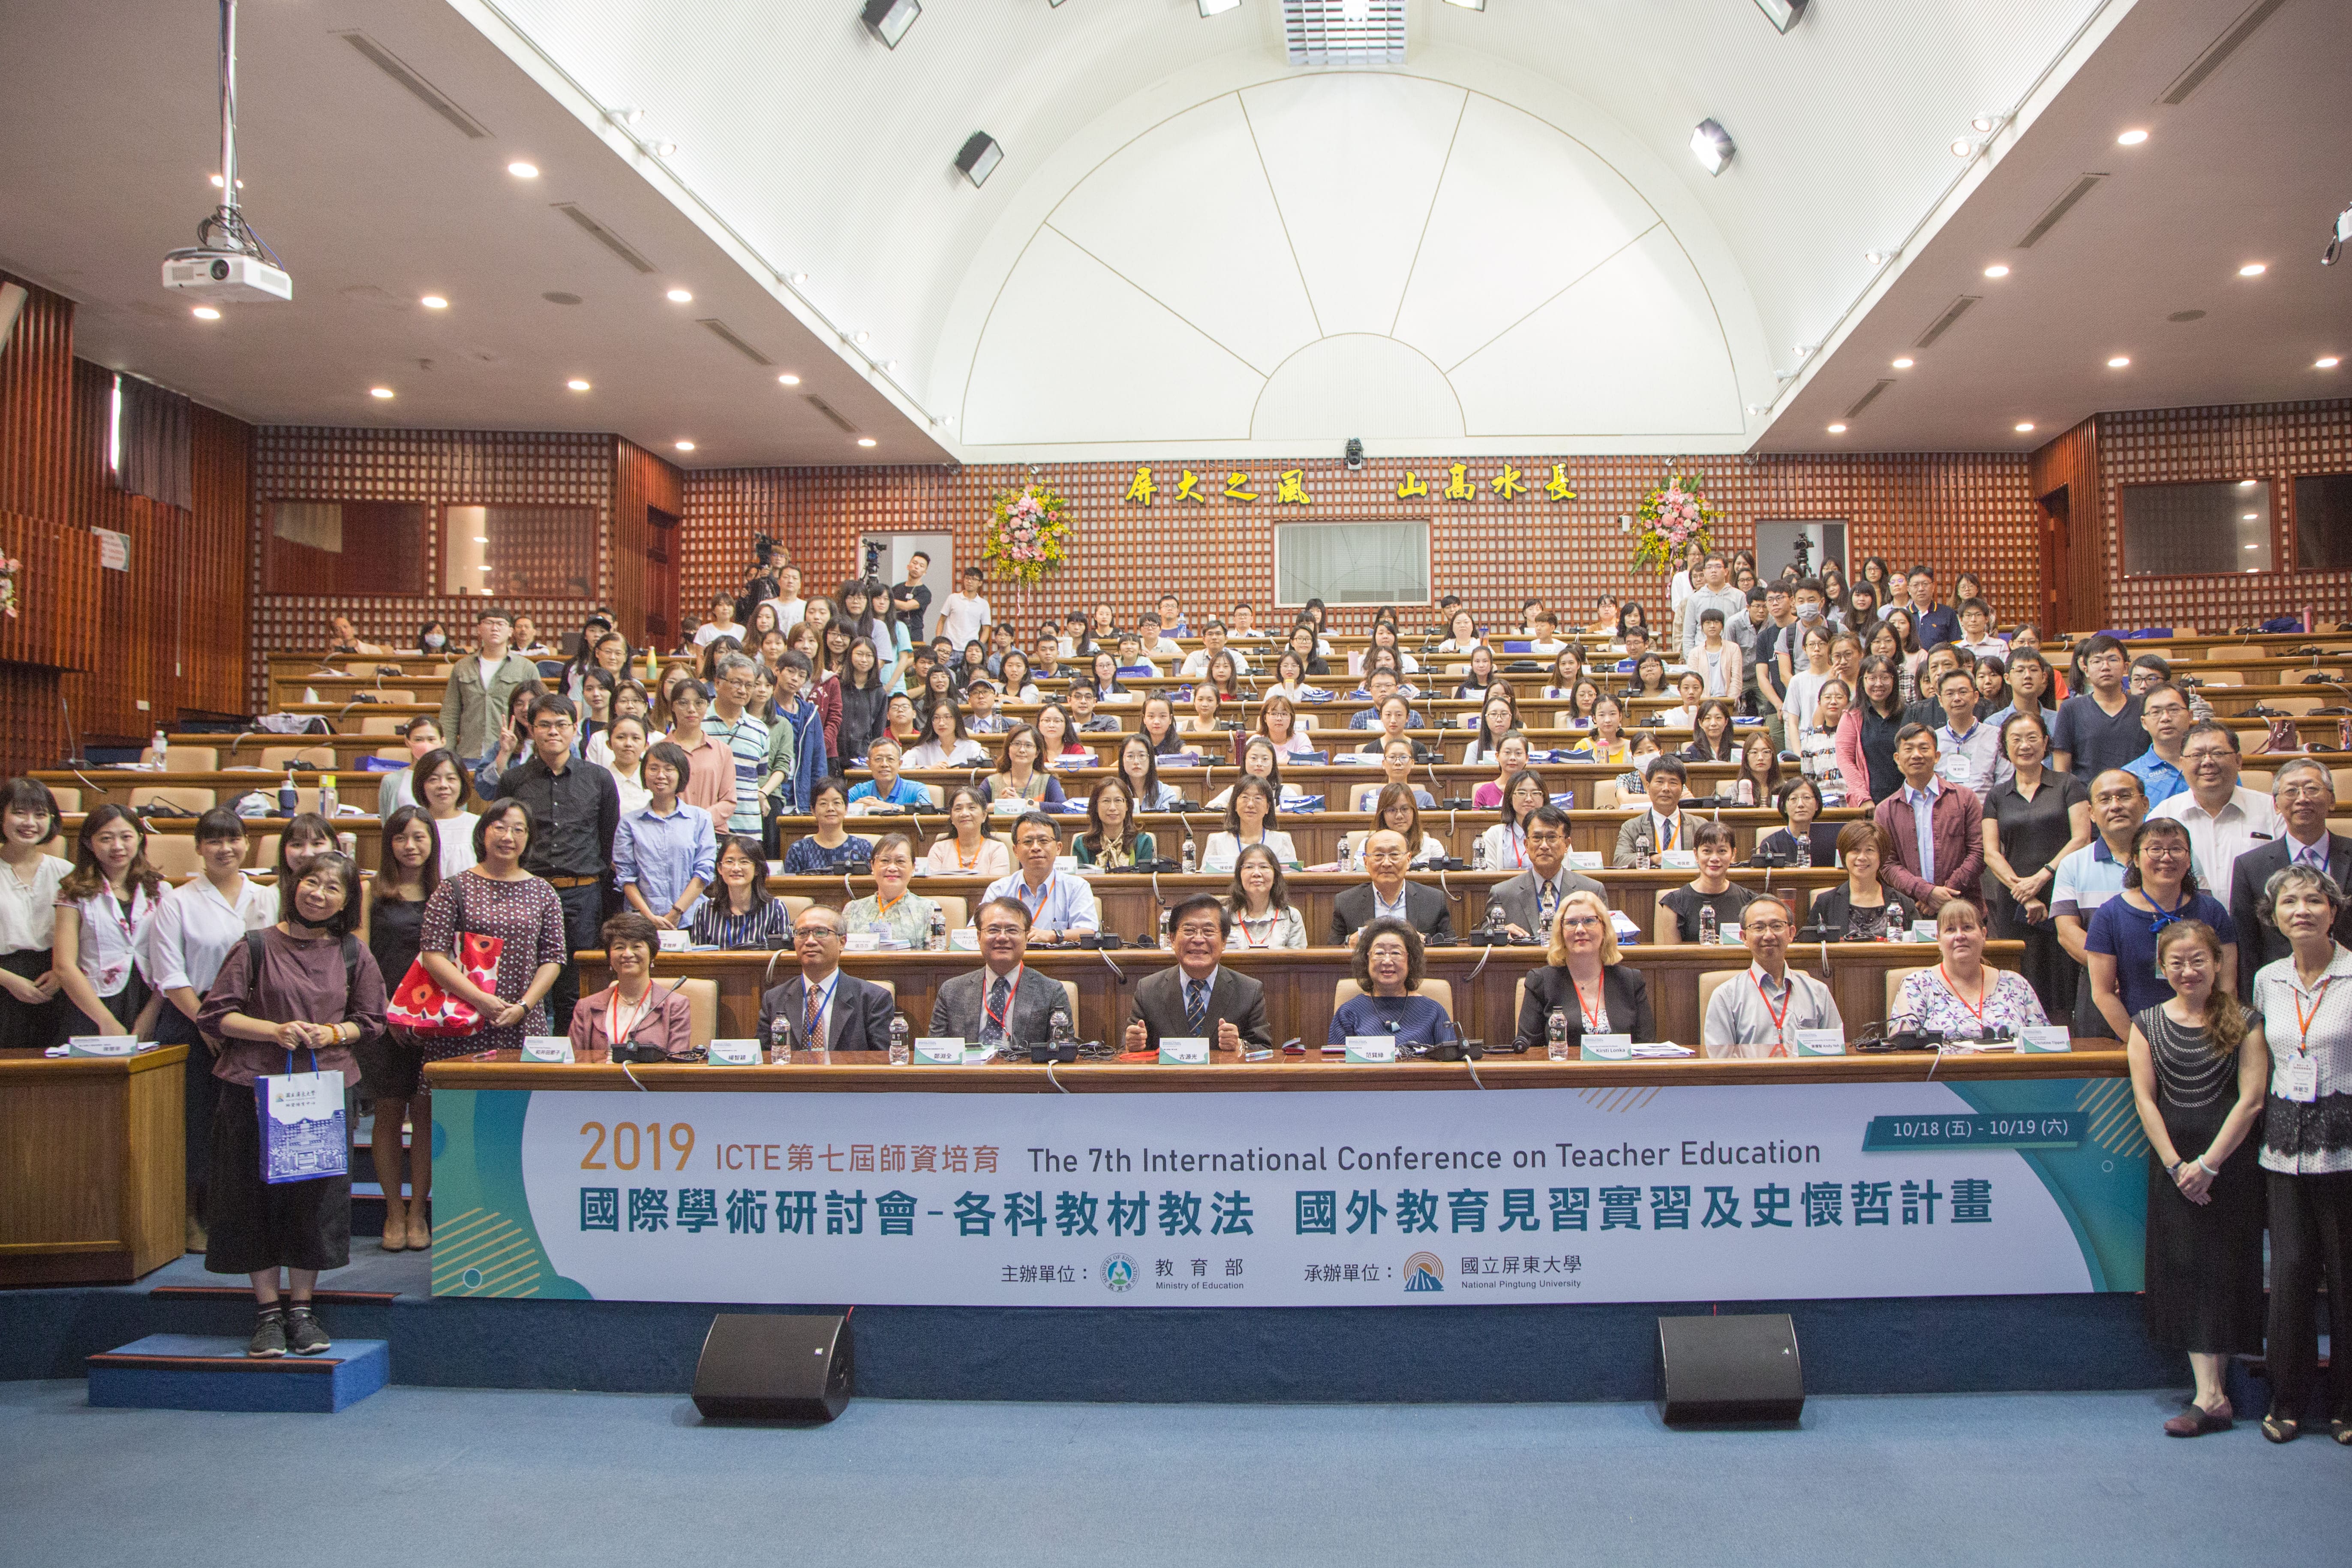 2019 the 7th International Conference on Teacher Education held by the Ministry of Education The Achievement Demonstration of Our Nation’s Teacher Education and Connection to the International World